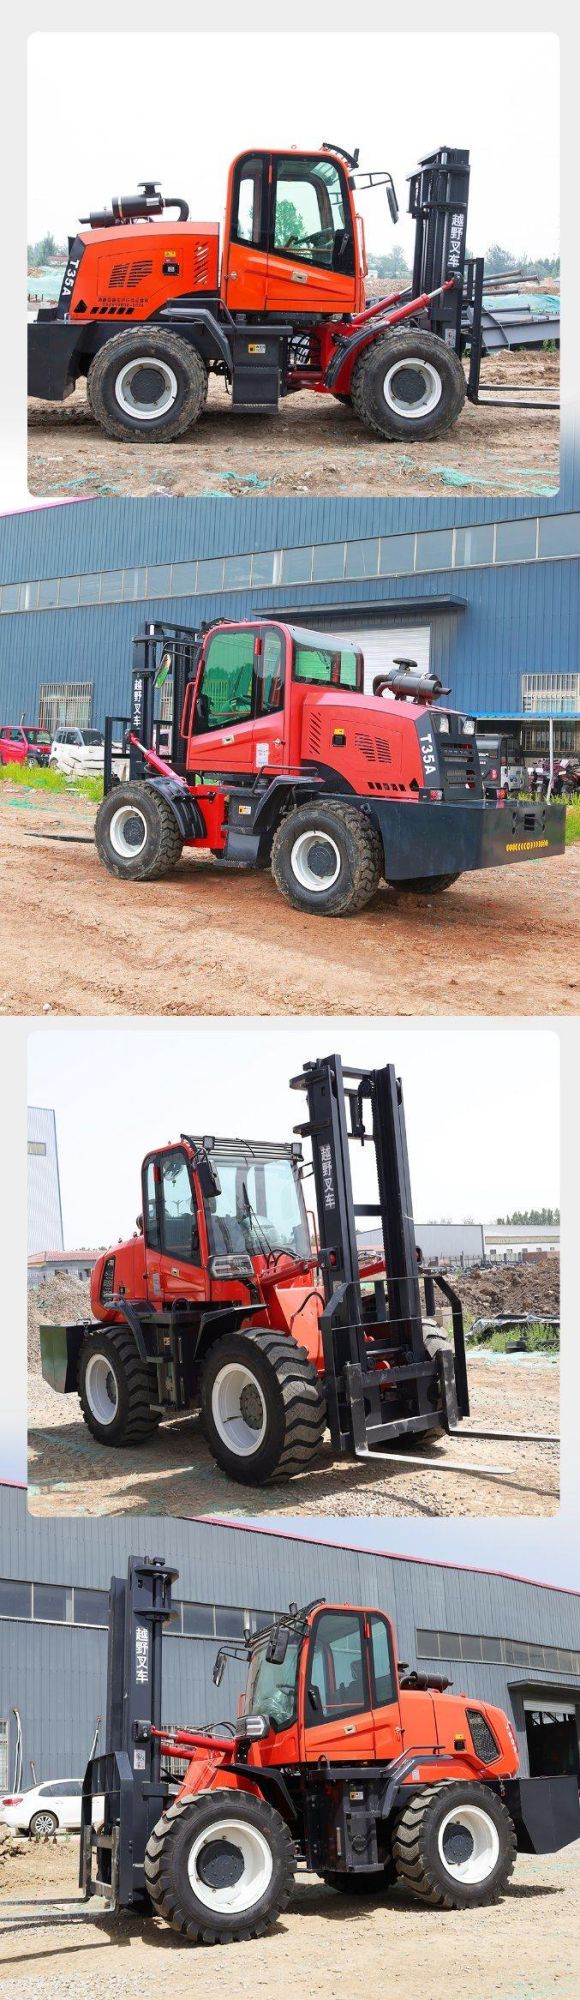 Four-Wheel Drive Cross-Country Mounted Forklift All Terrain Made in China